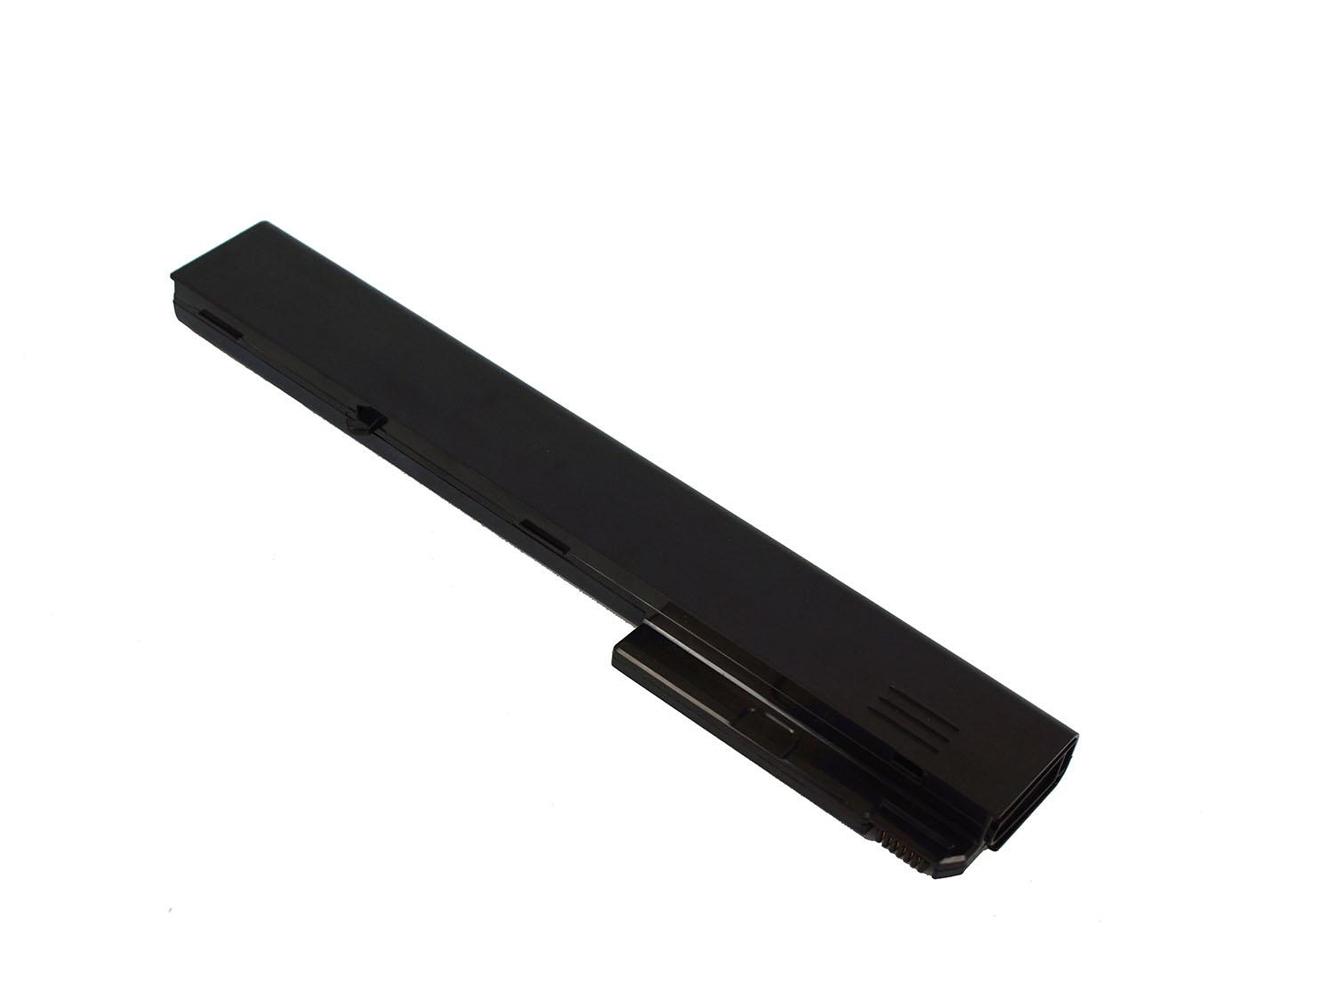 Replacement for HP COMPAQ Business Notebook 7400, 8200, 8400, 8500, 8700, 9400, nc, nw, nx Series, Business Notebook 6720t Laptop Battery